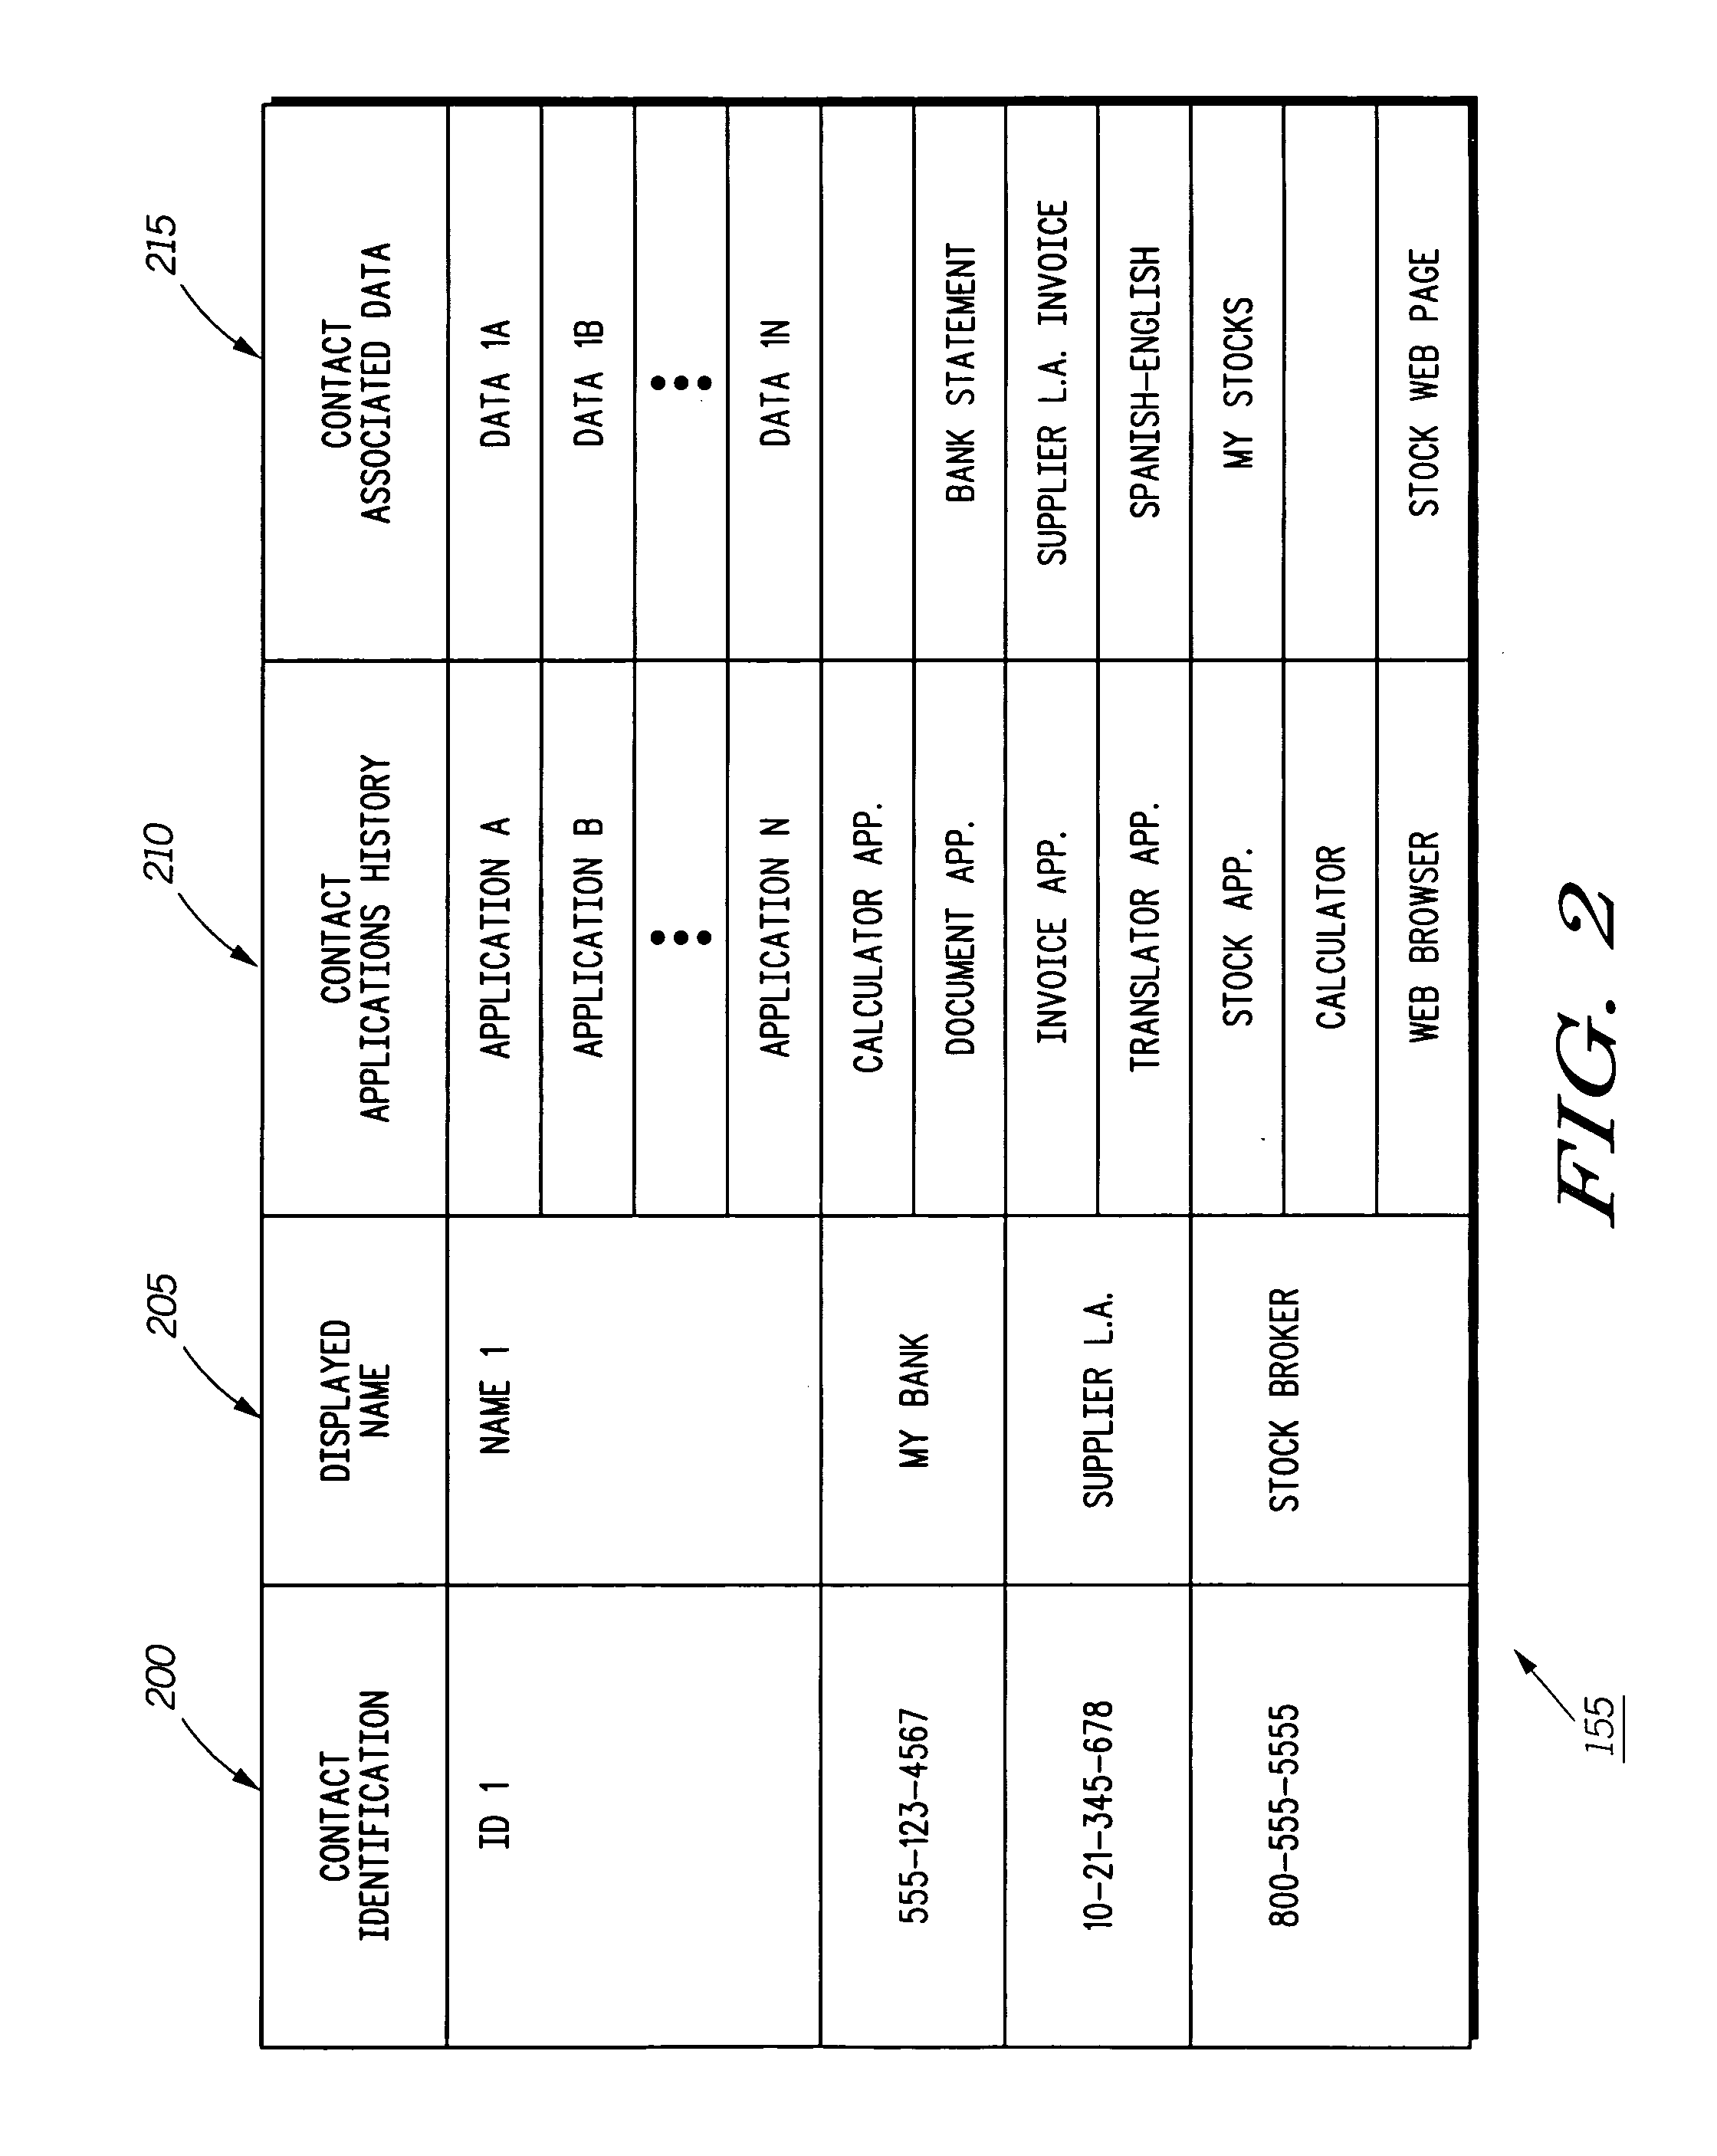 Communication device and method of operation therefor